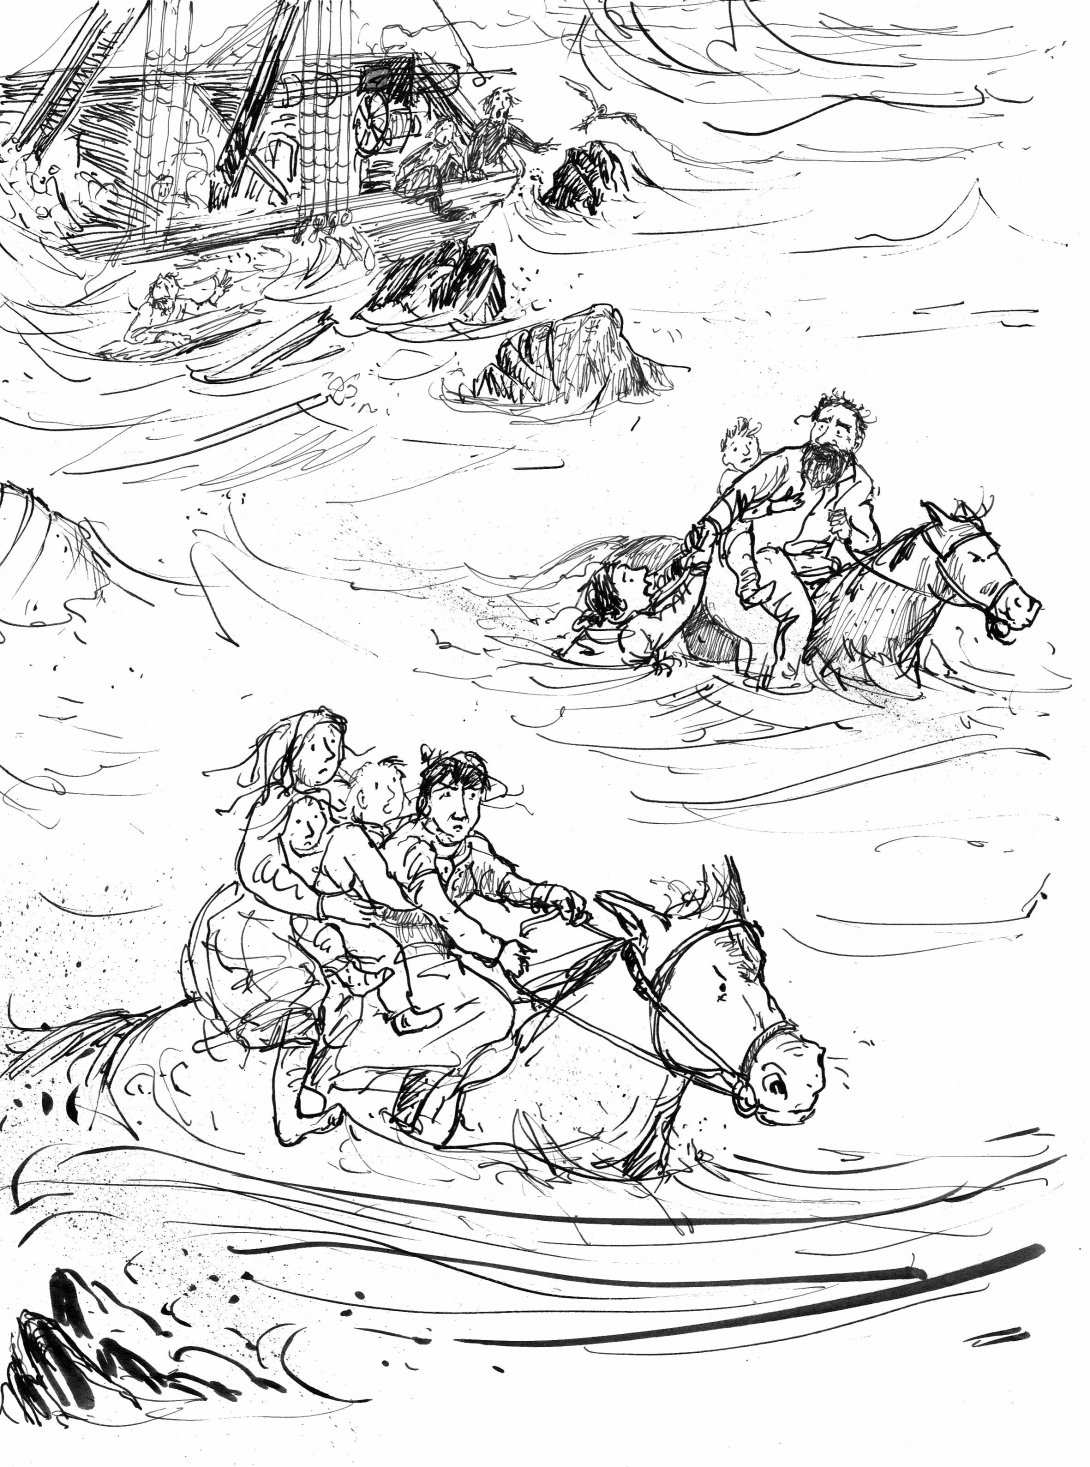 Sketch of adults and children riding horses through water and away from a sinking ship